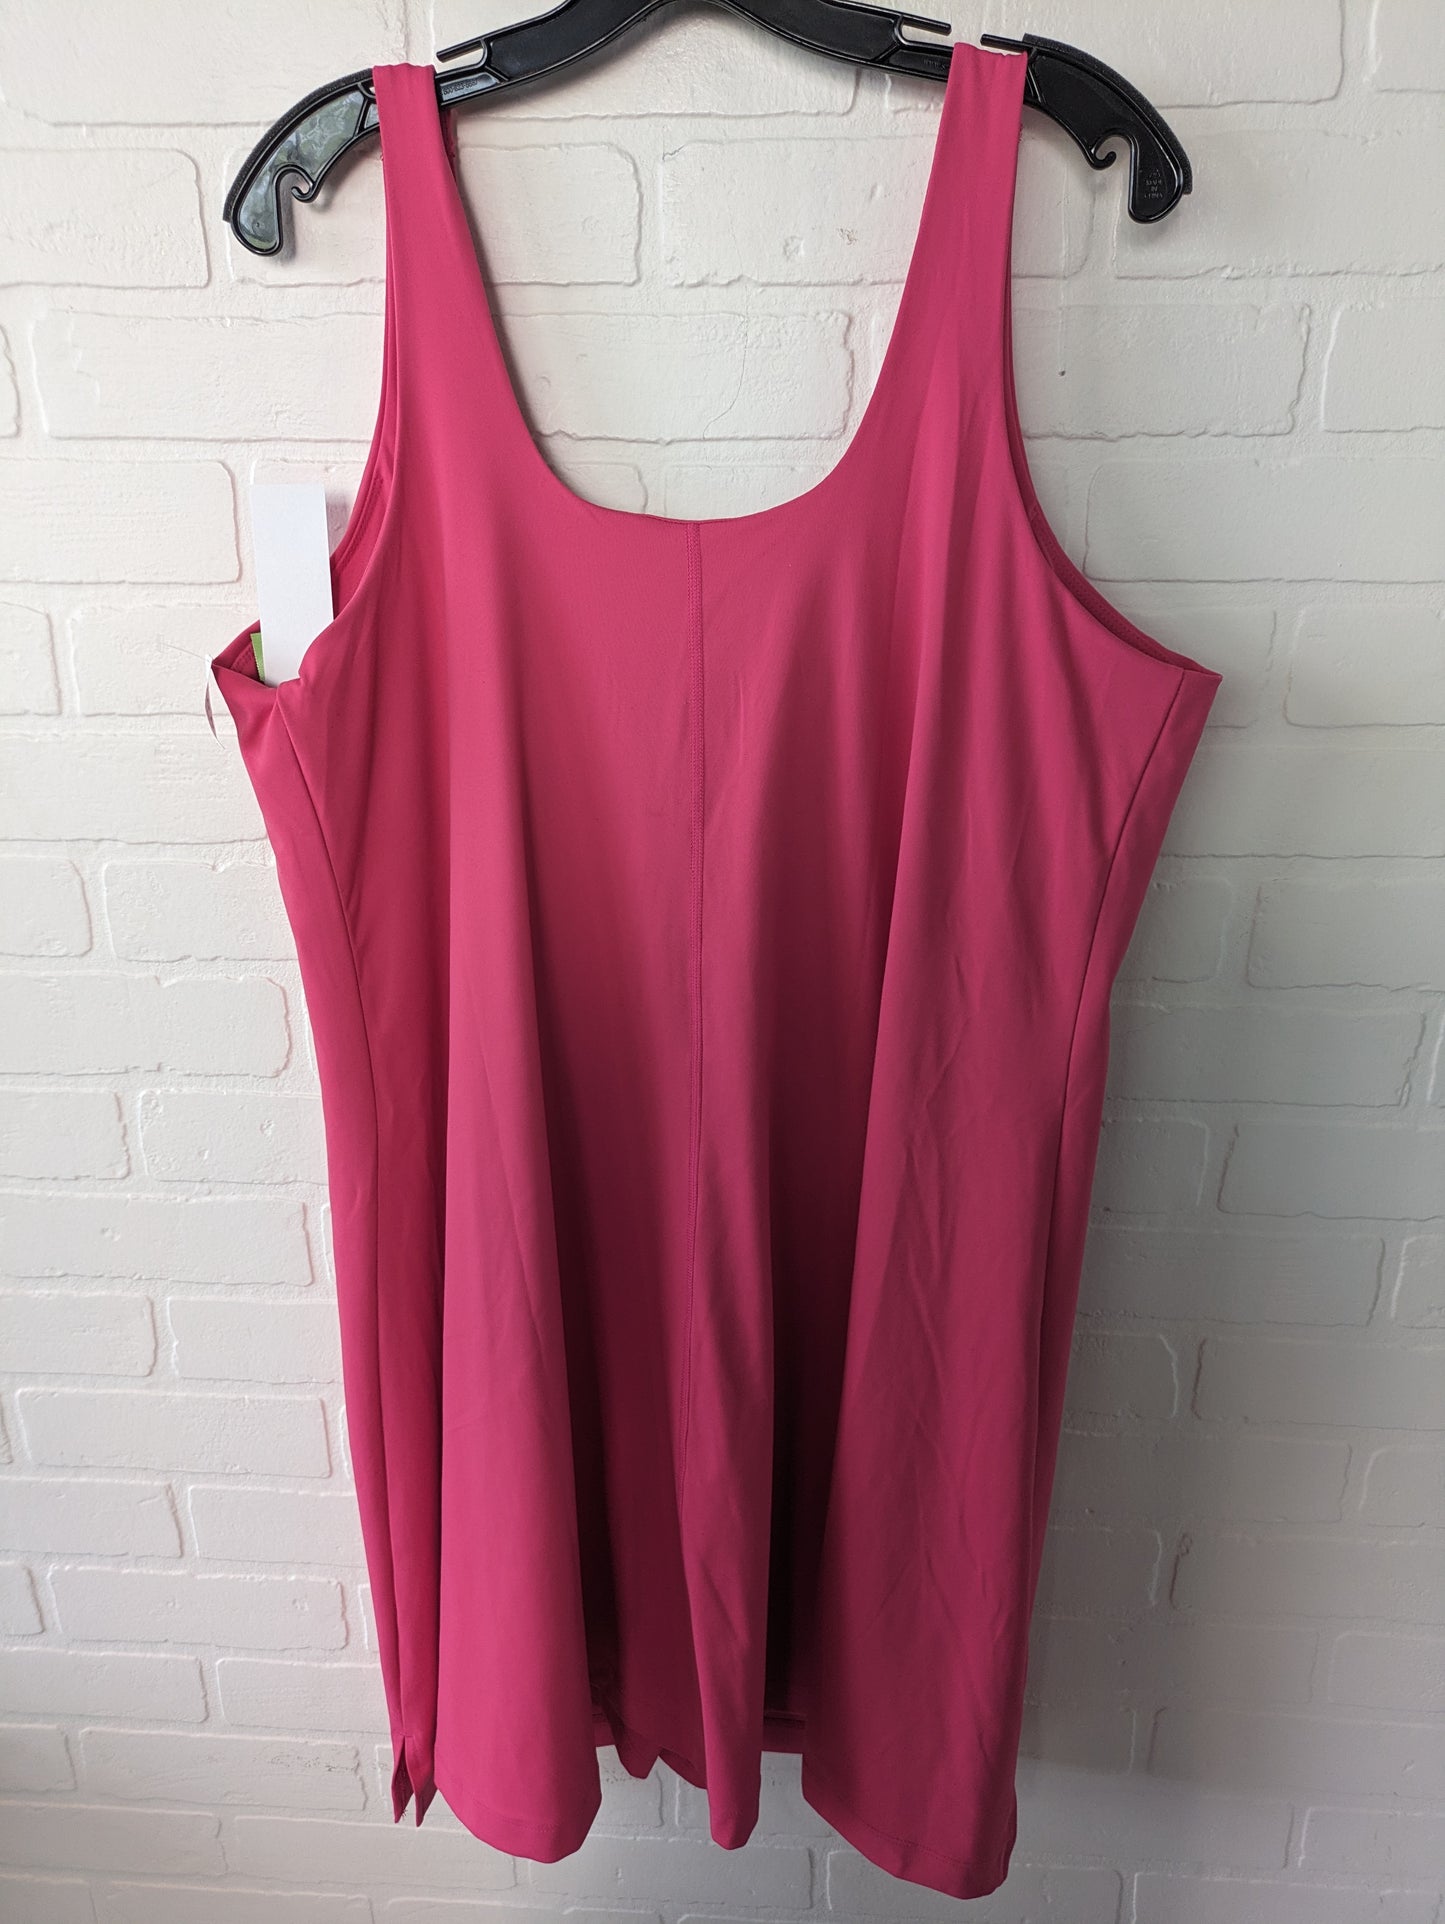 Athletic Dress By Old Navy  Size: 1x